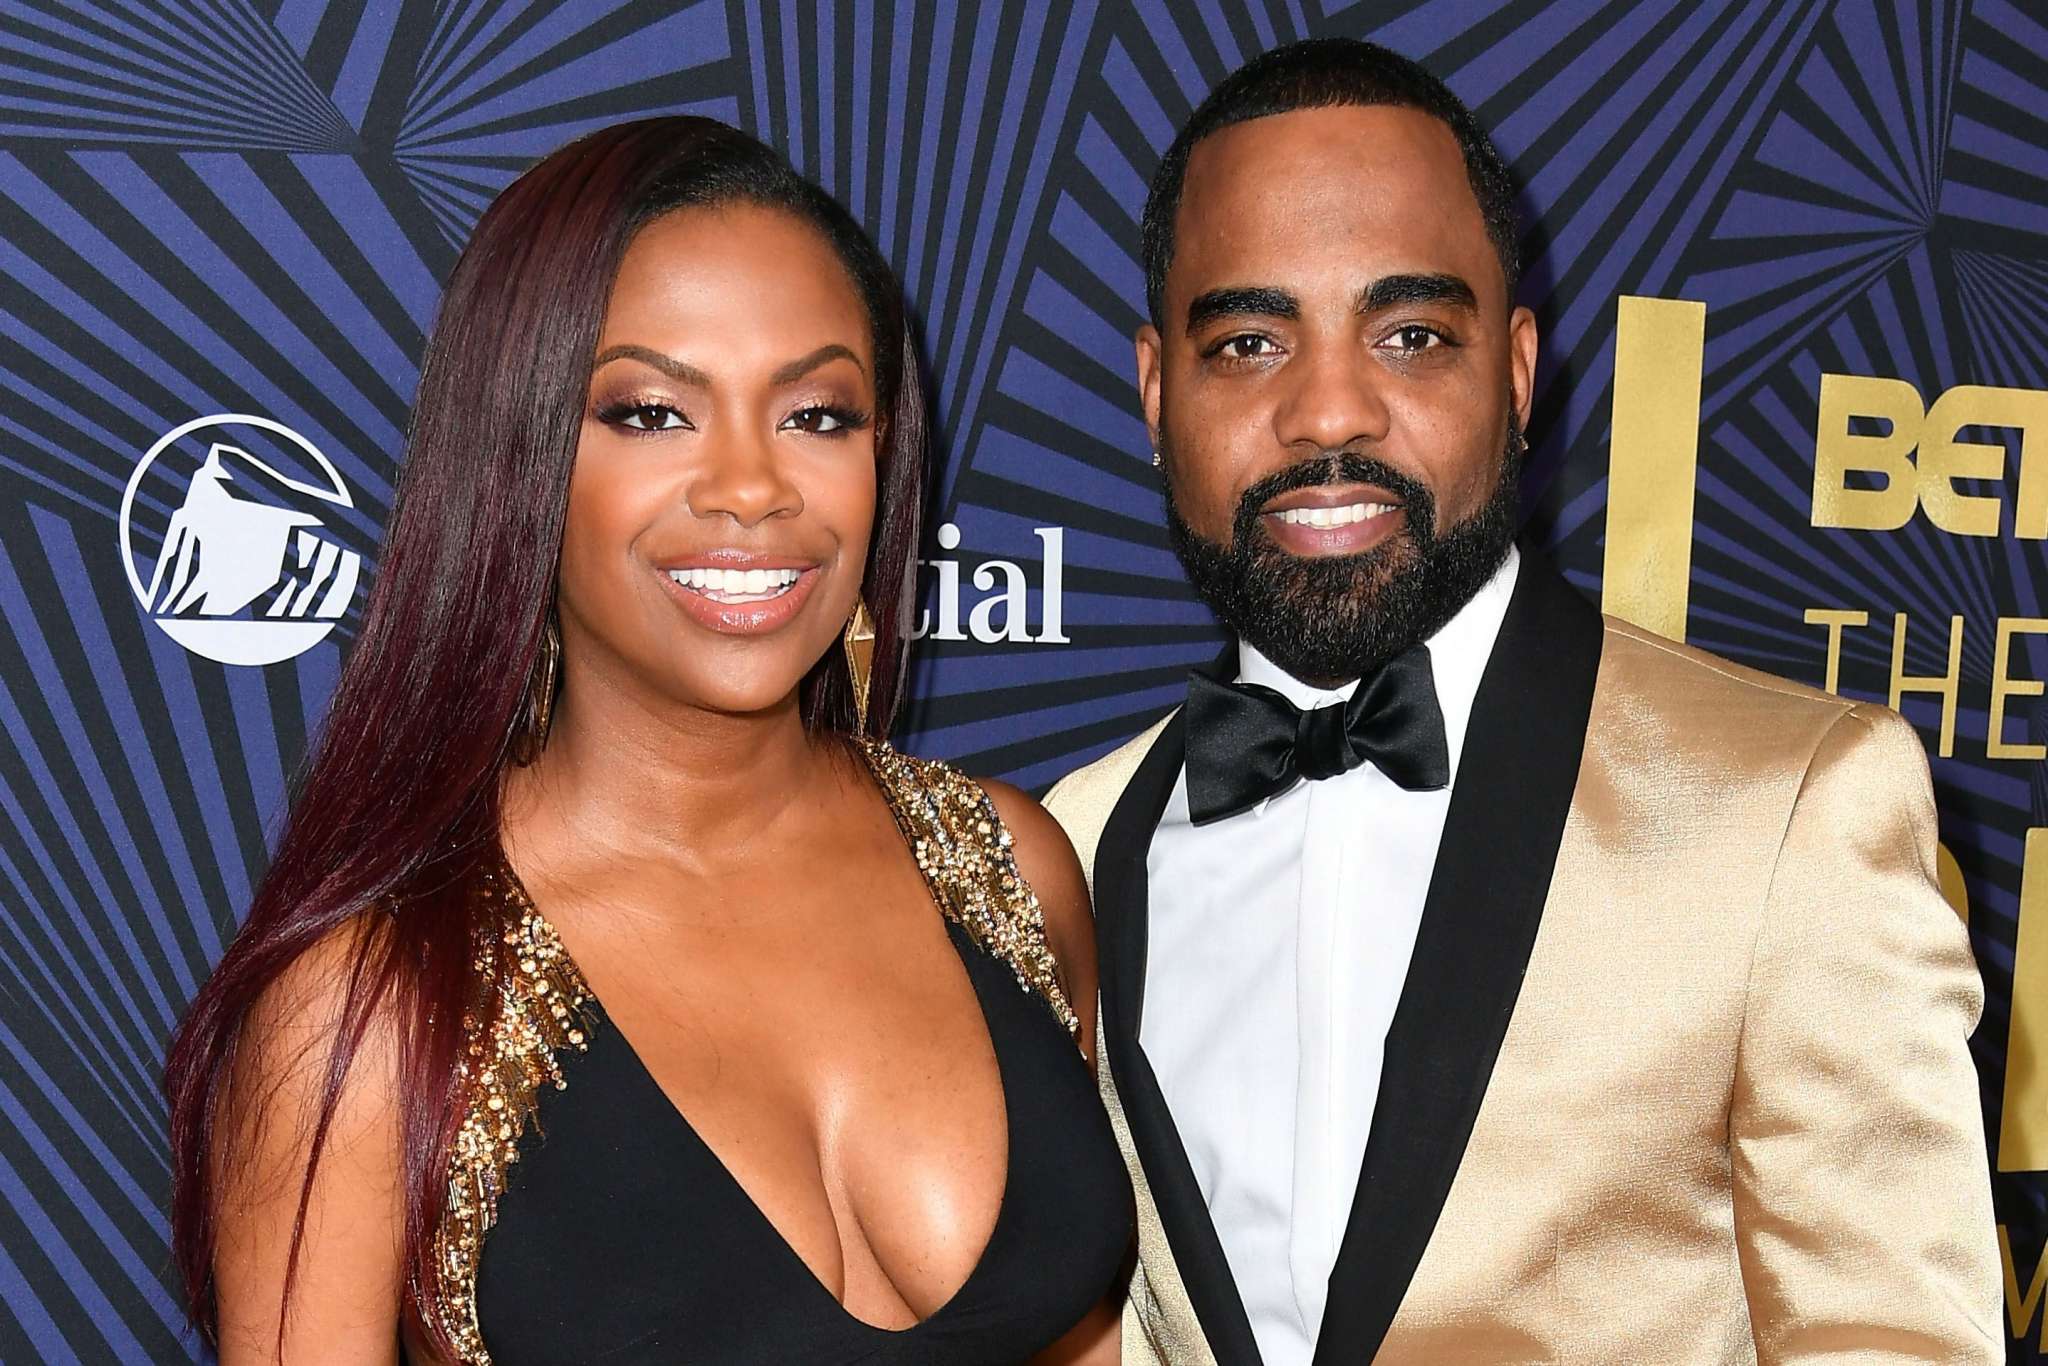 ”kandi-burruss-shows-love-to-some-musicians-check-out-her-message-here”